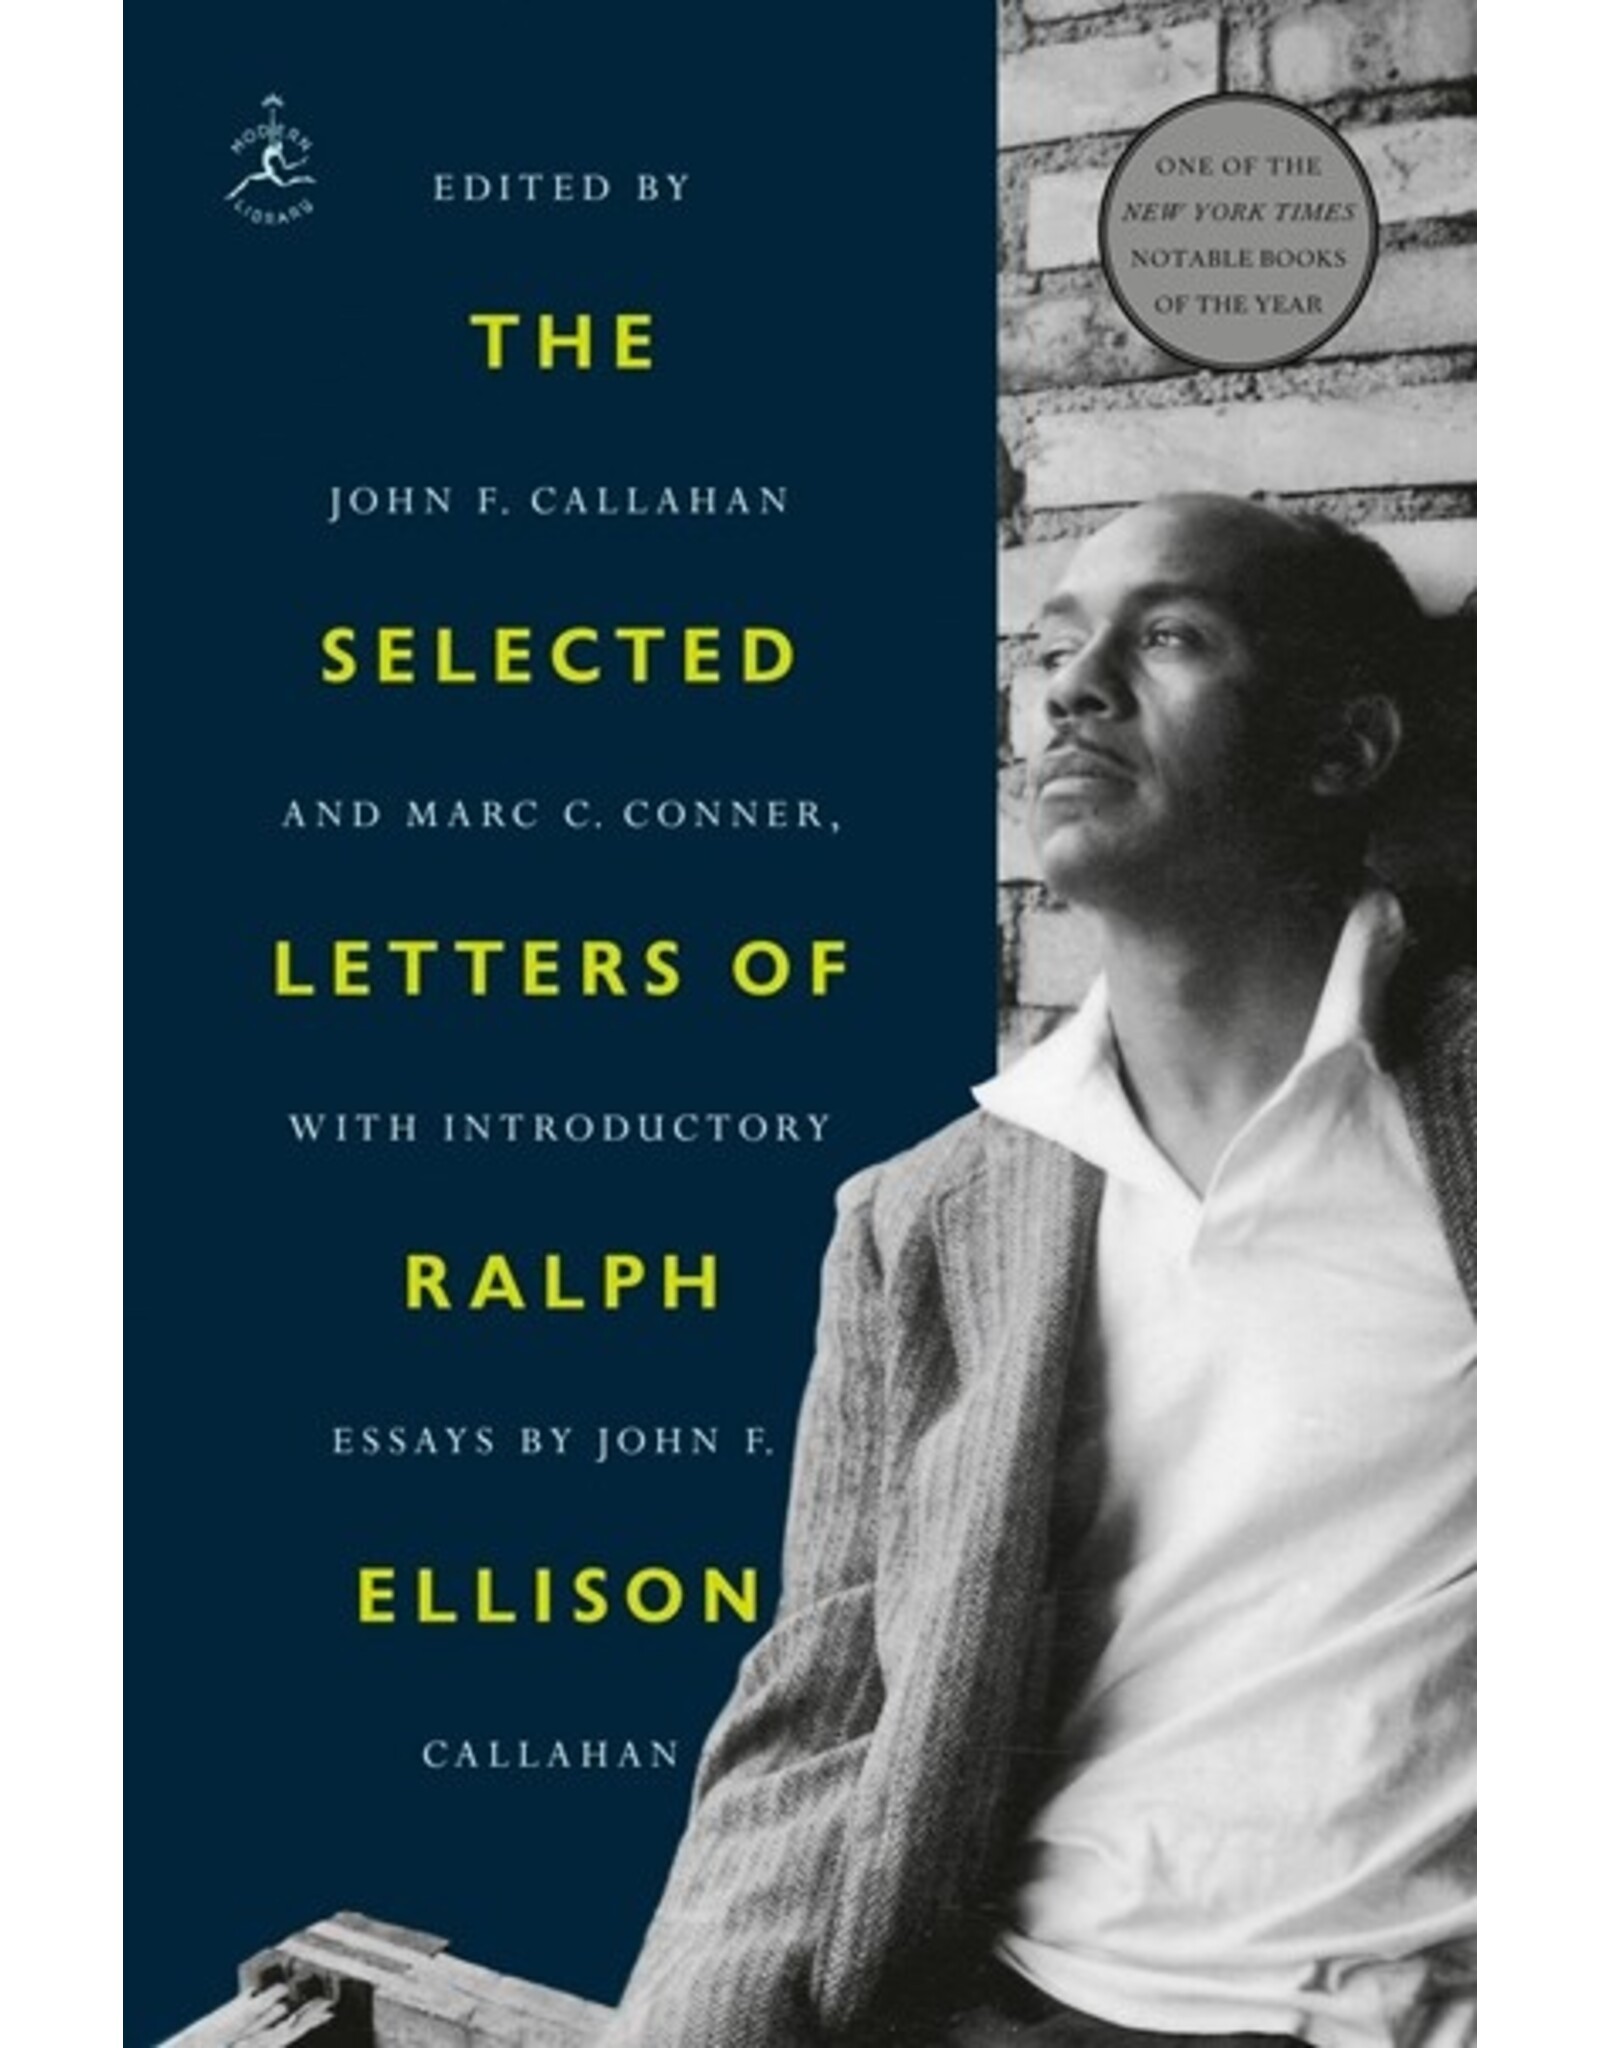 Books The Selected Letters of Ralph Ellison  edited John F. Callahan and Marc C. Conner